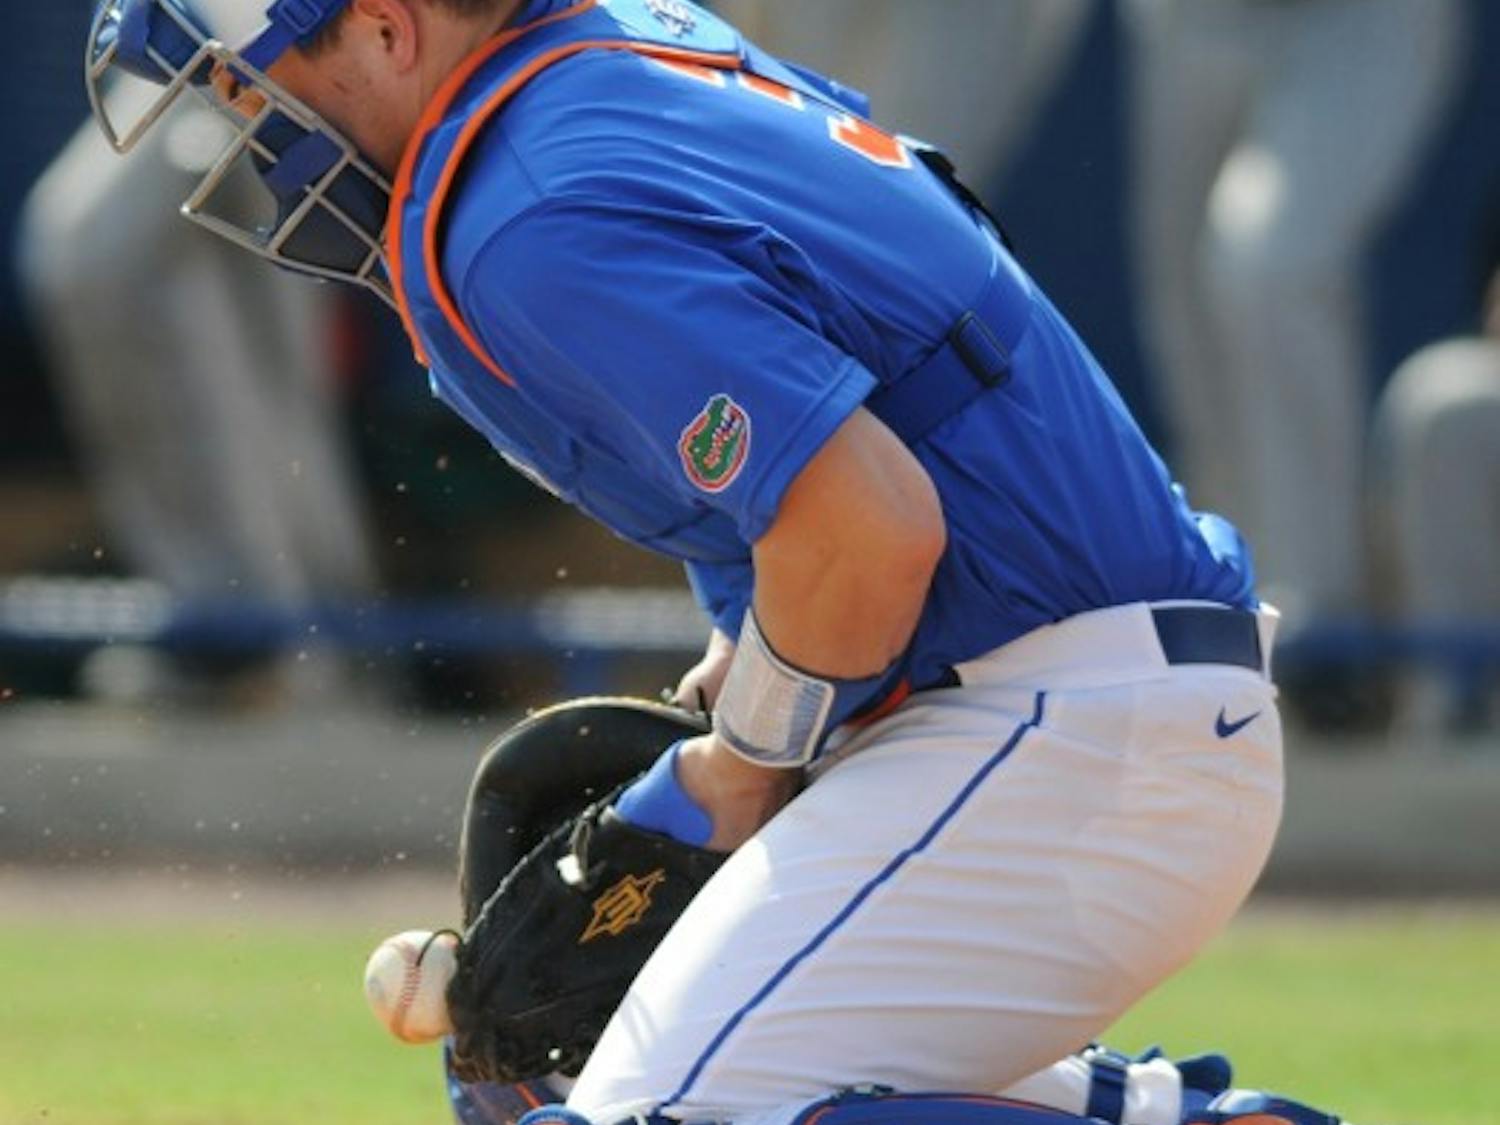 Florida junior catcher and All-American Mike Zunino said he is working with freshman backstop Taylor Gushue to help his transition.